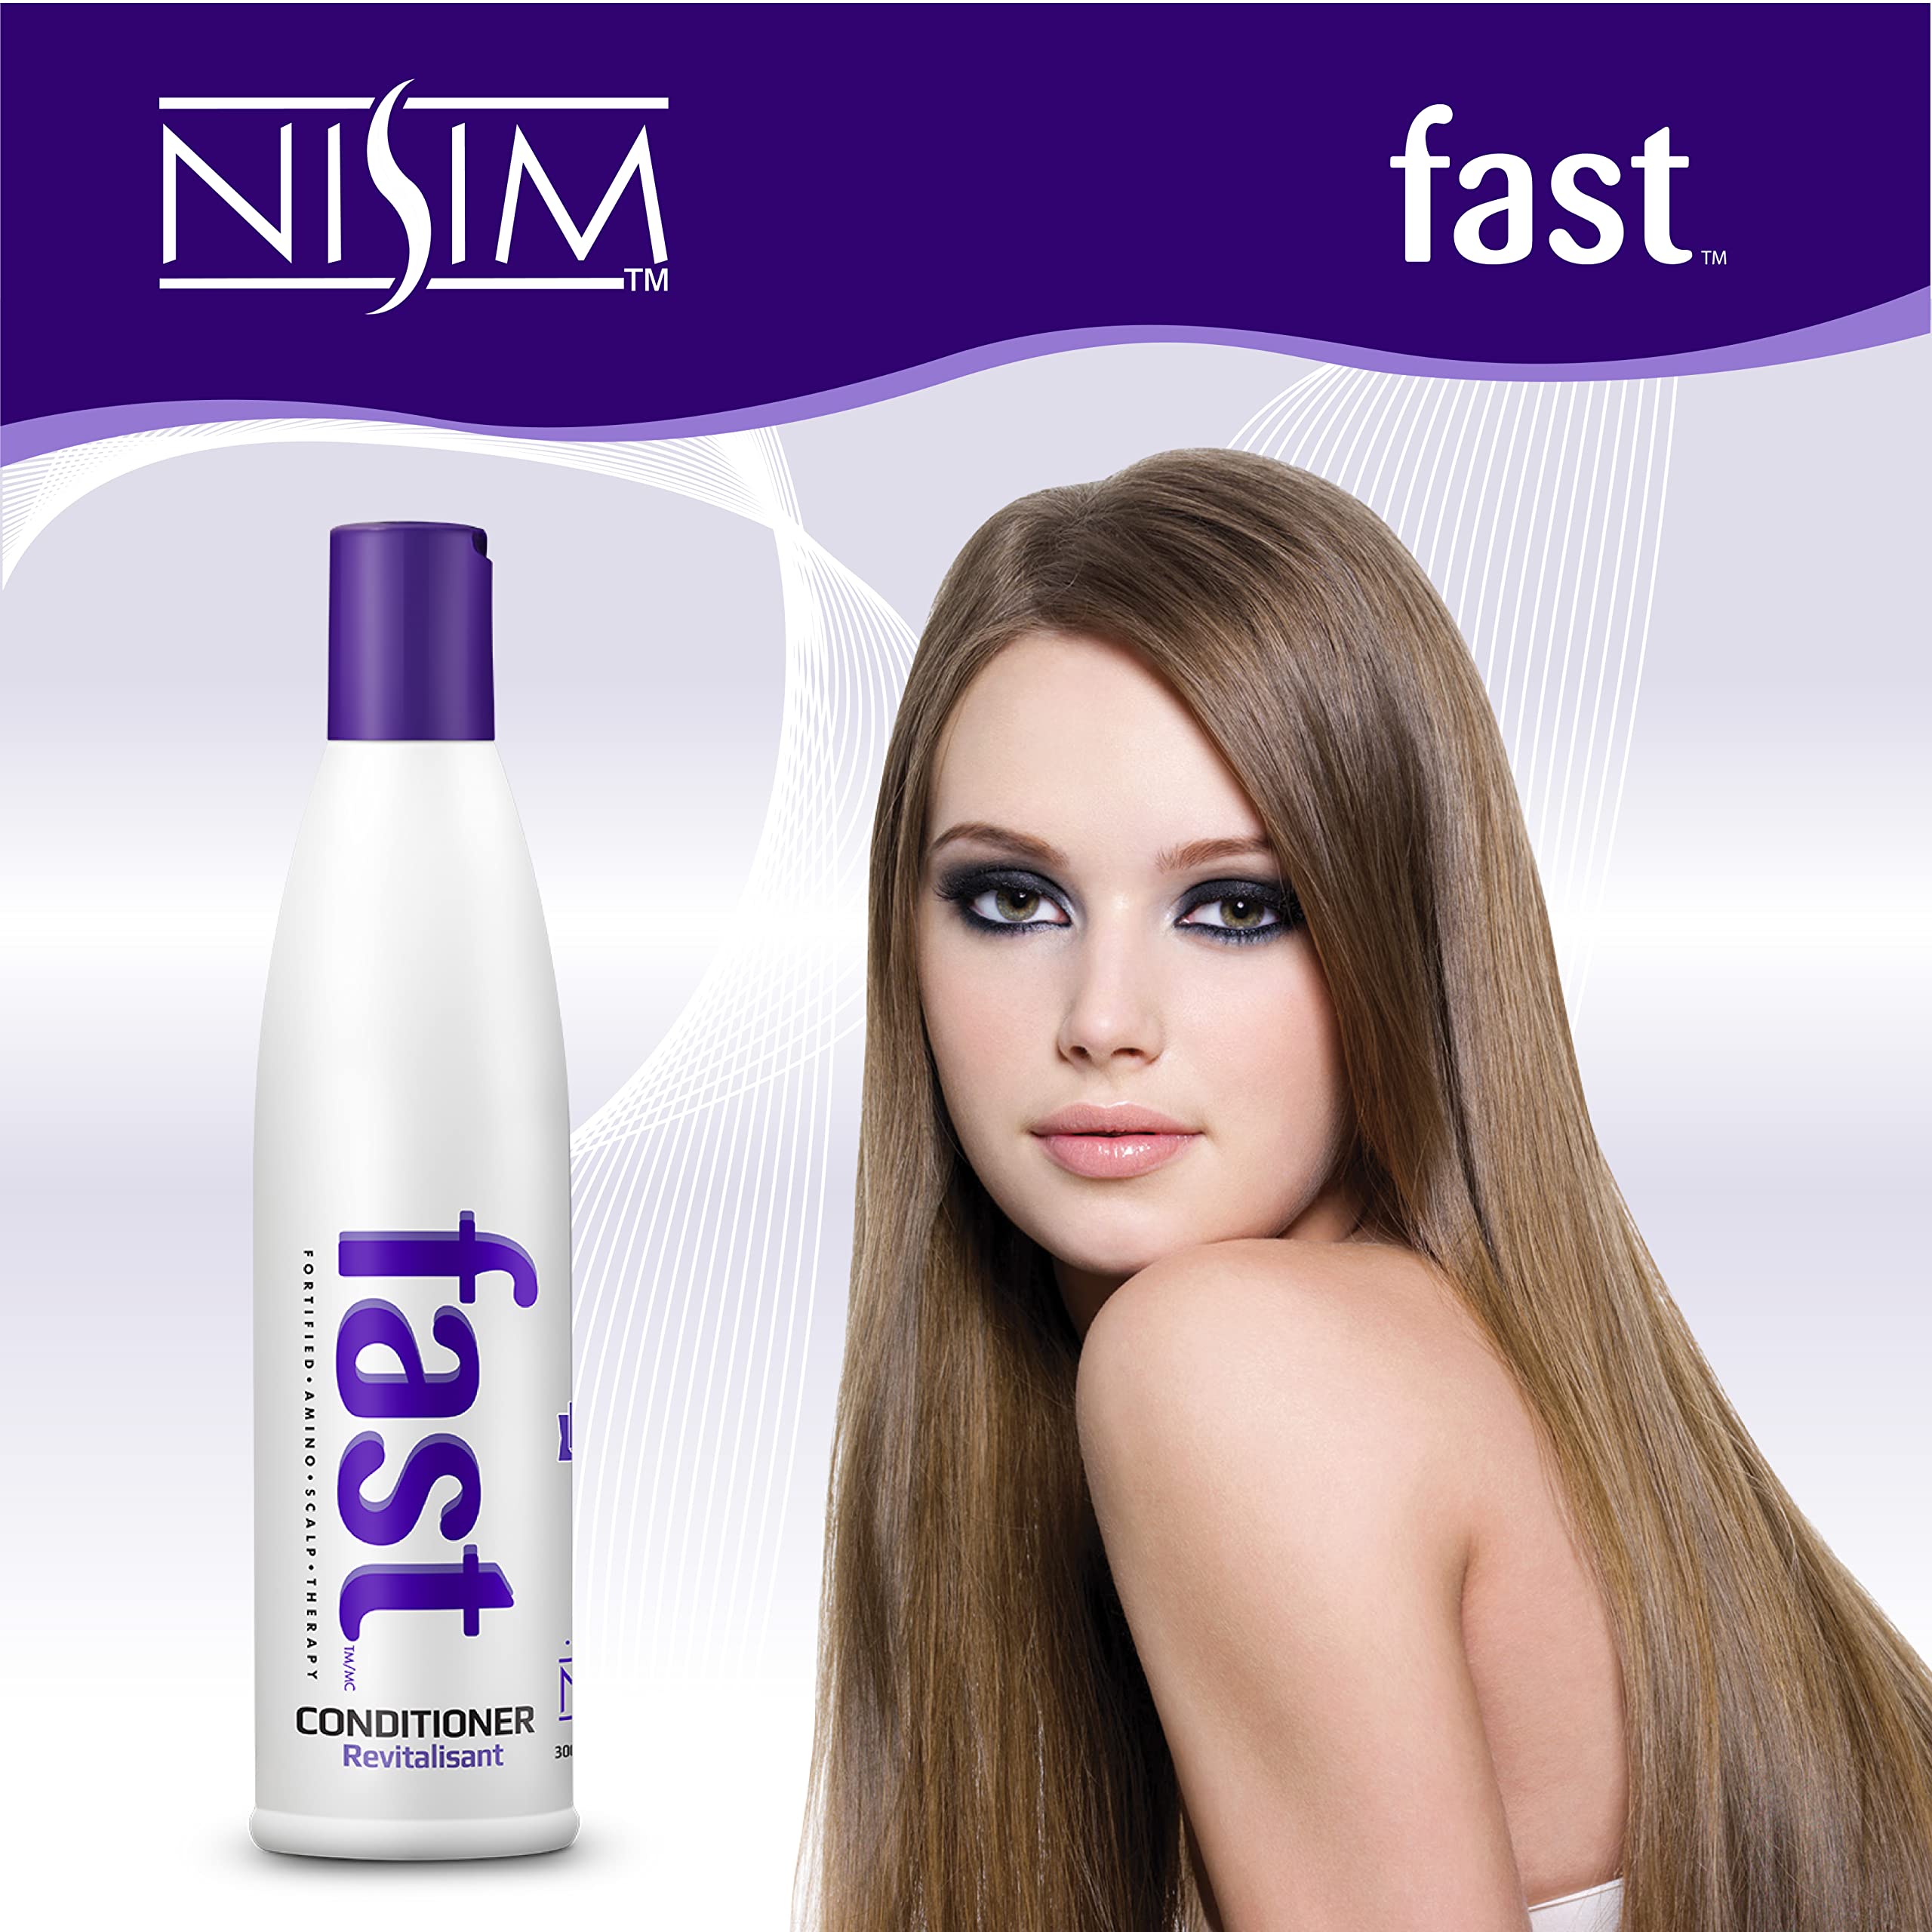 Nisim F.A.S.T Fortified Amino Scalp Therapy Conditioner for Hair Growth - Supports Faster & Longer Hair with Essential Nutrients, Amino Acids & Proteins - Sulfate-free, Paraben-free, 10 fl oz.